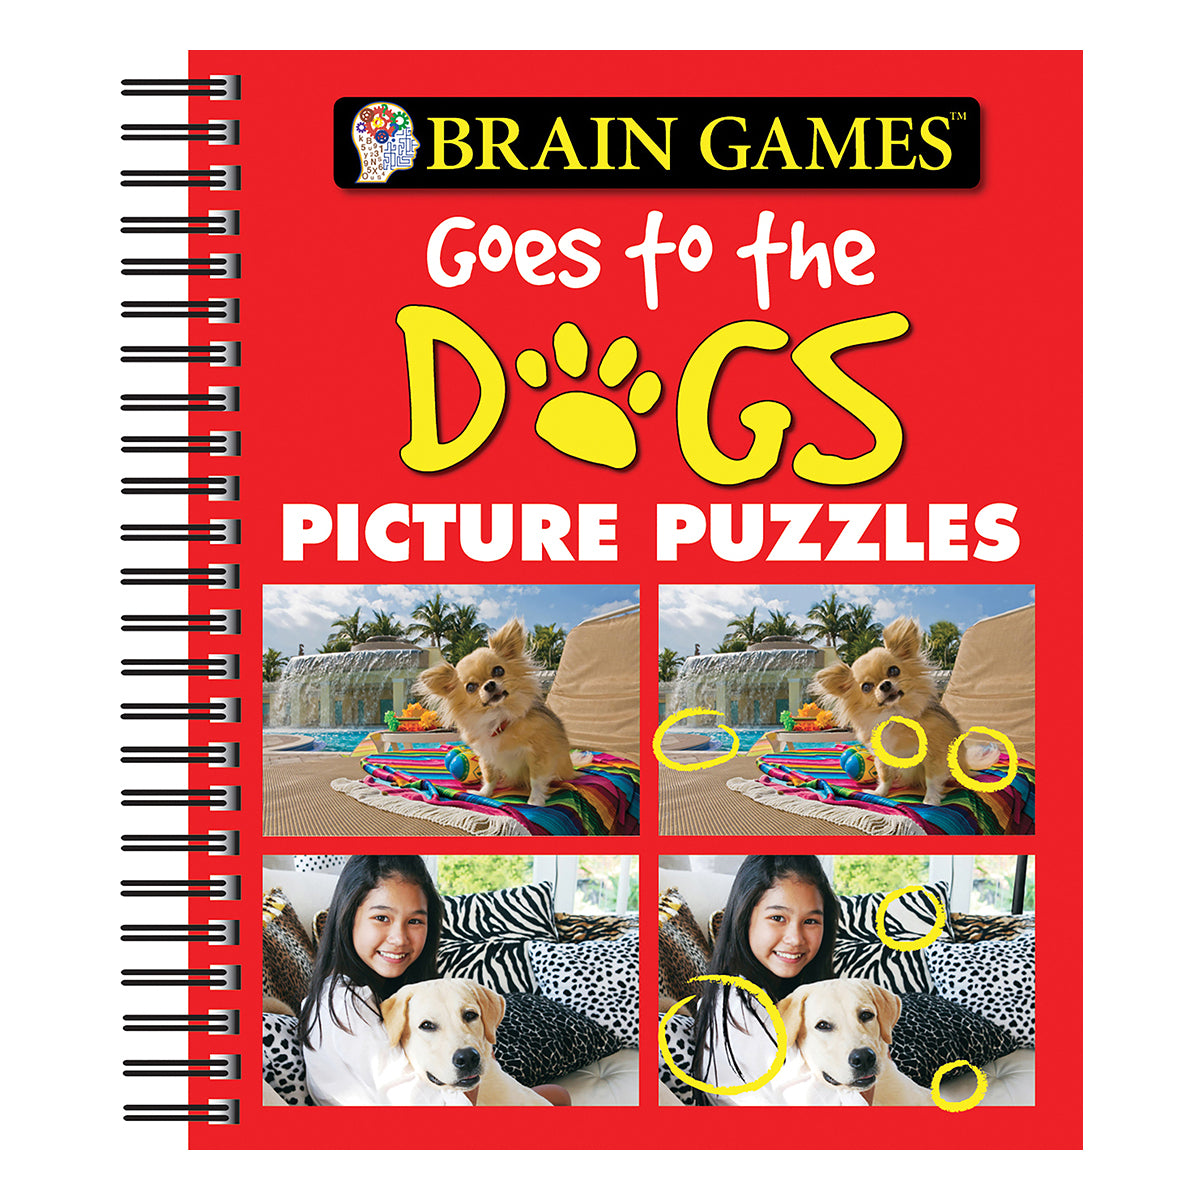 Brain Games  Picture Puzzles Goes to the Dogs